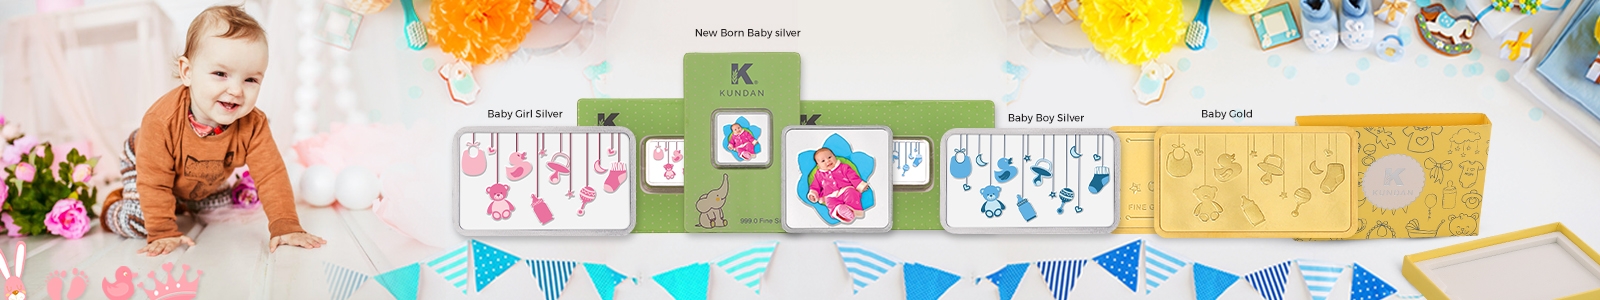 A Meaningful Memento For The Newborns